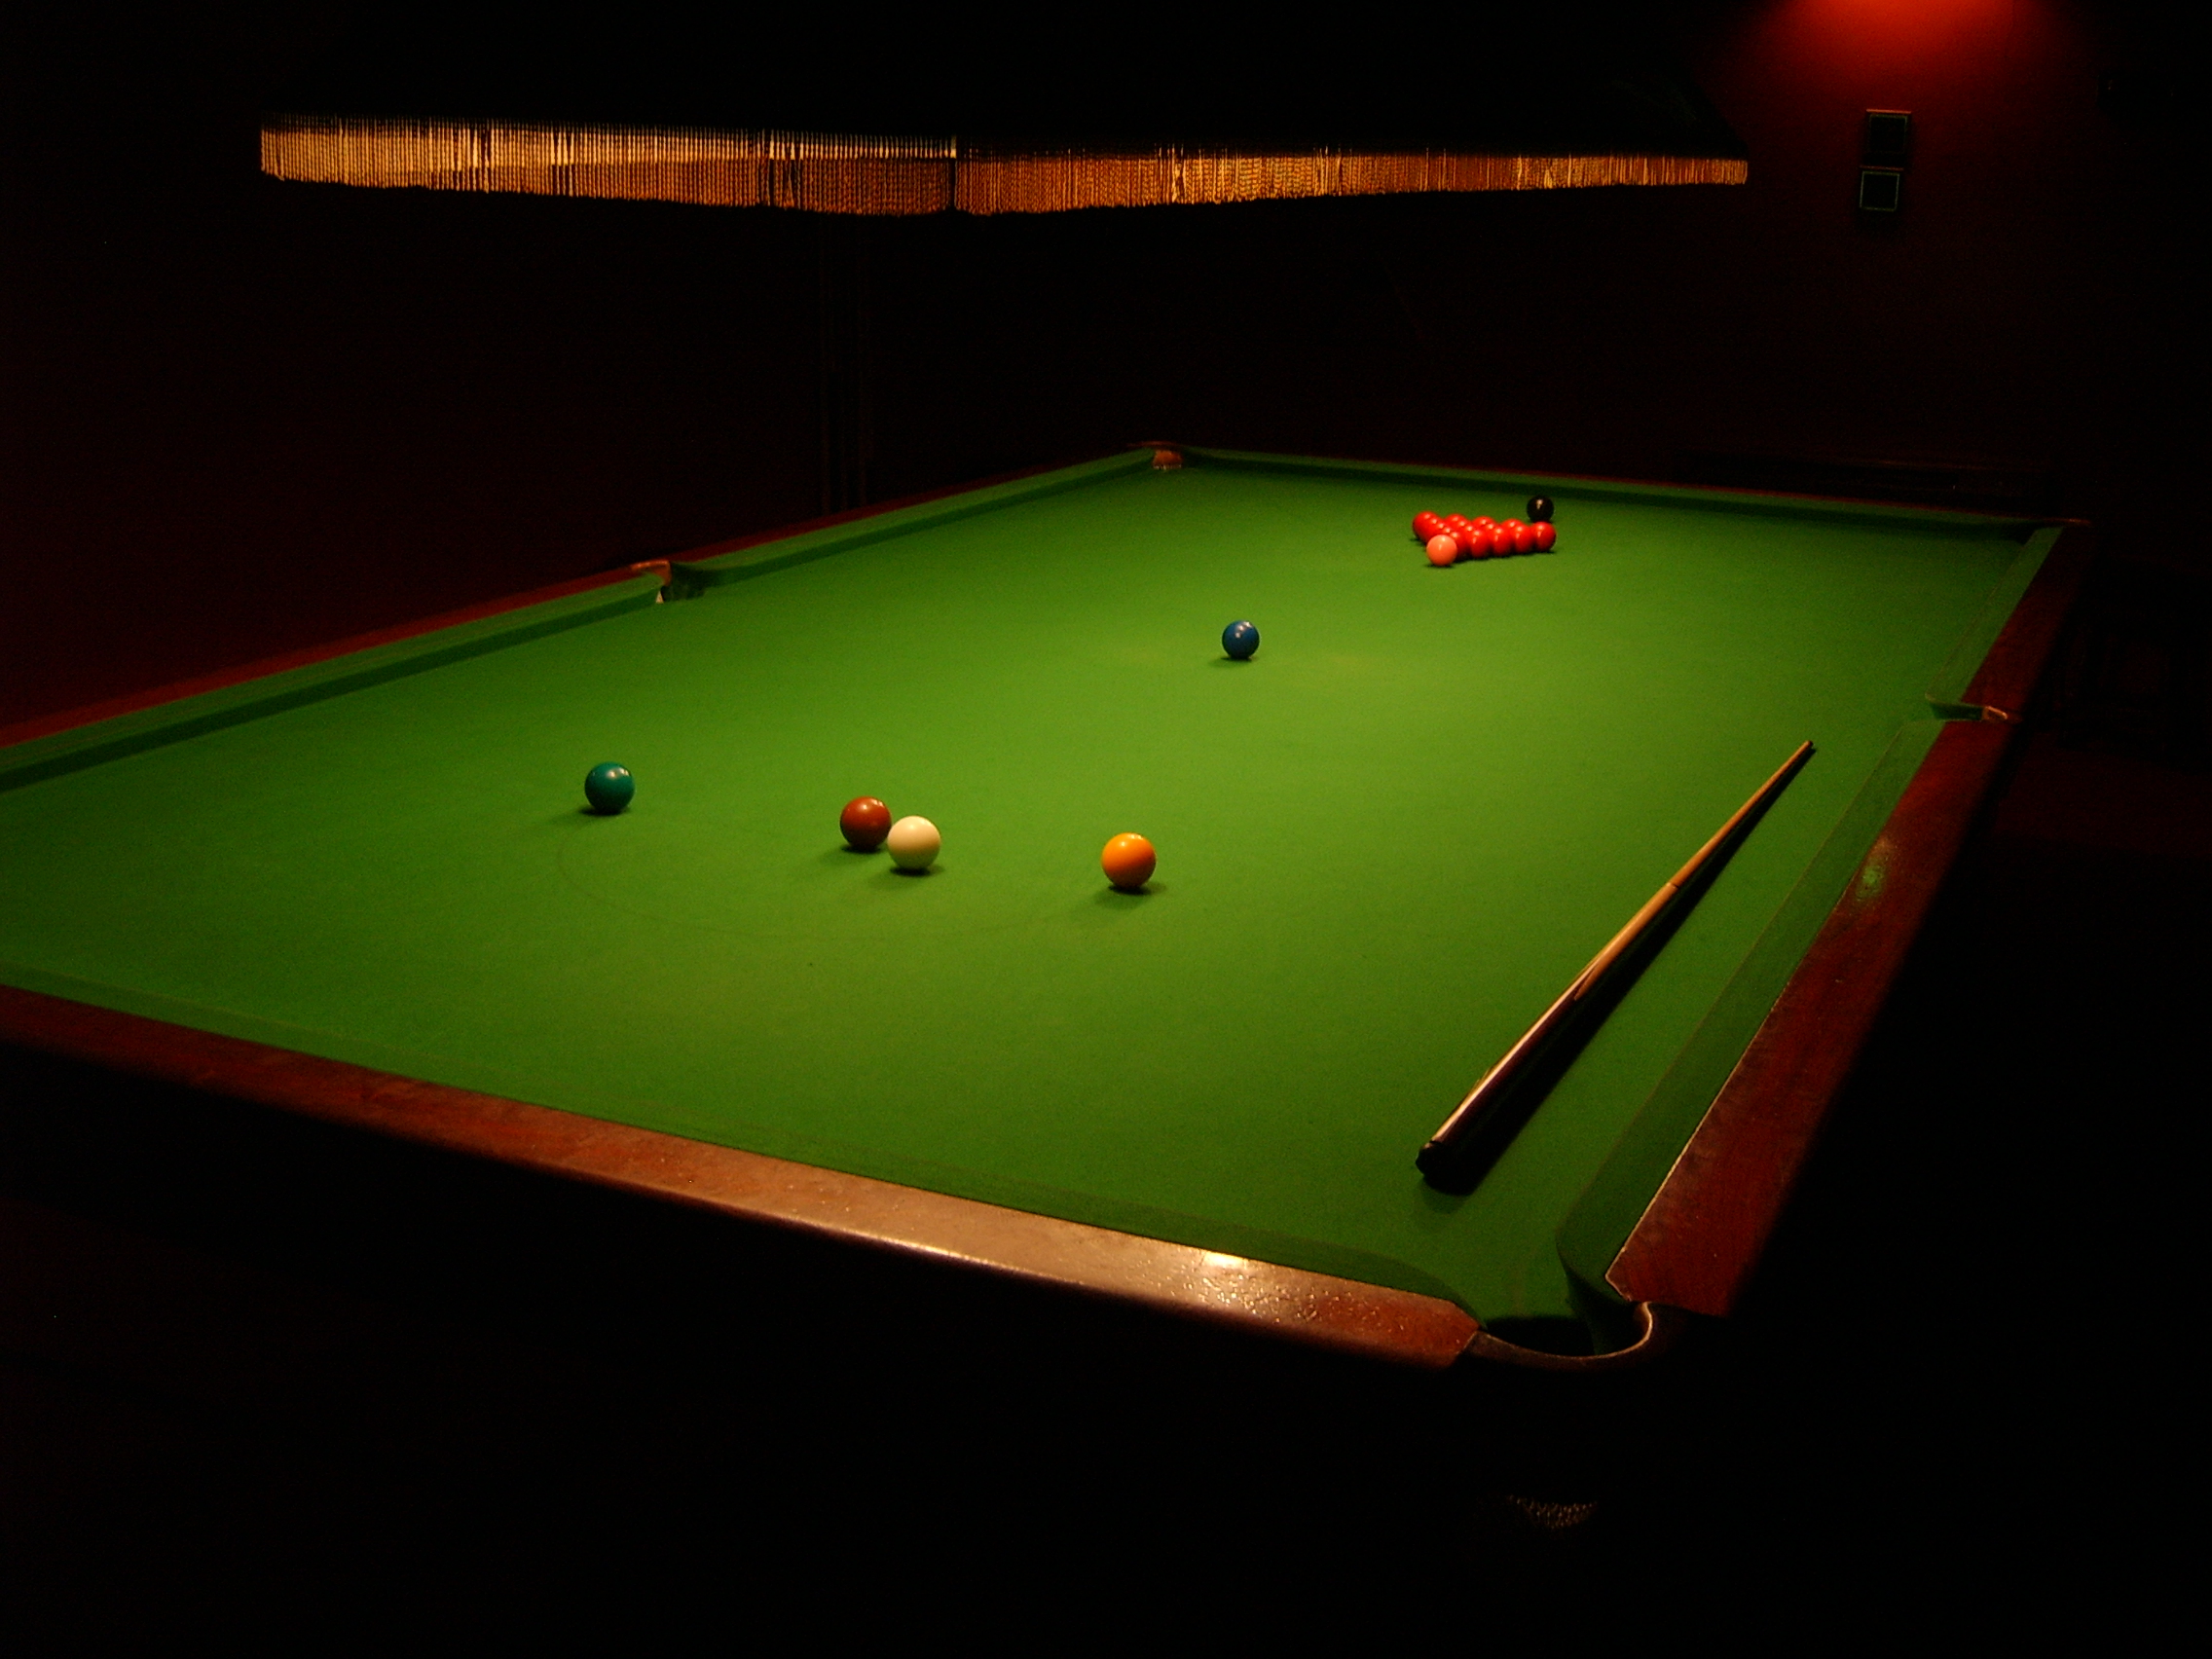 Step by Step Guide on How to Play Snooker Top of The Cue